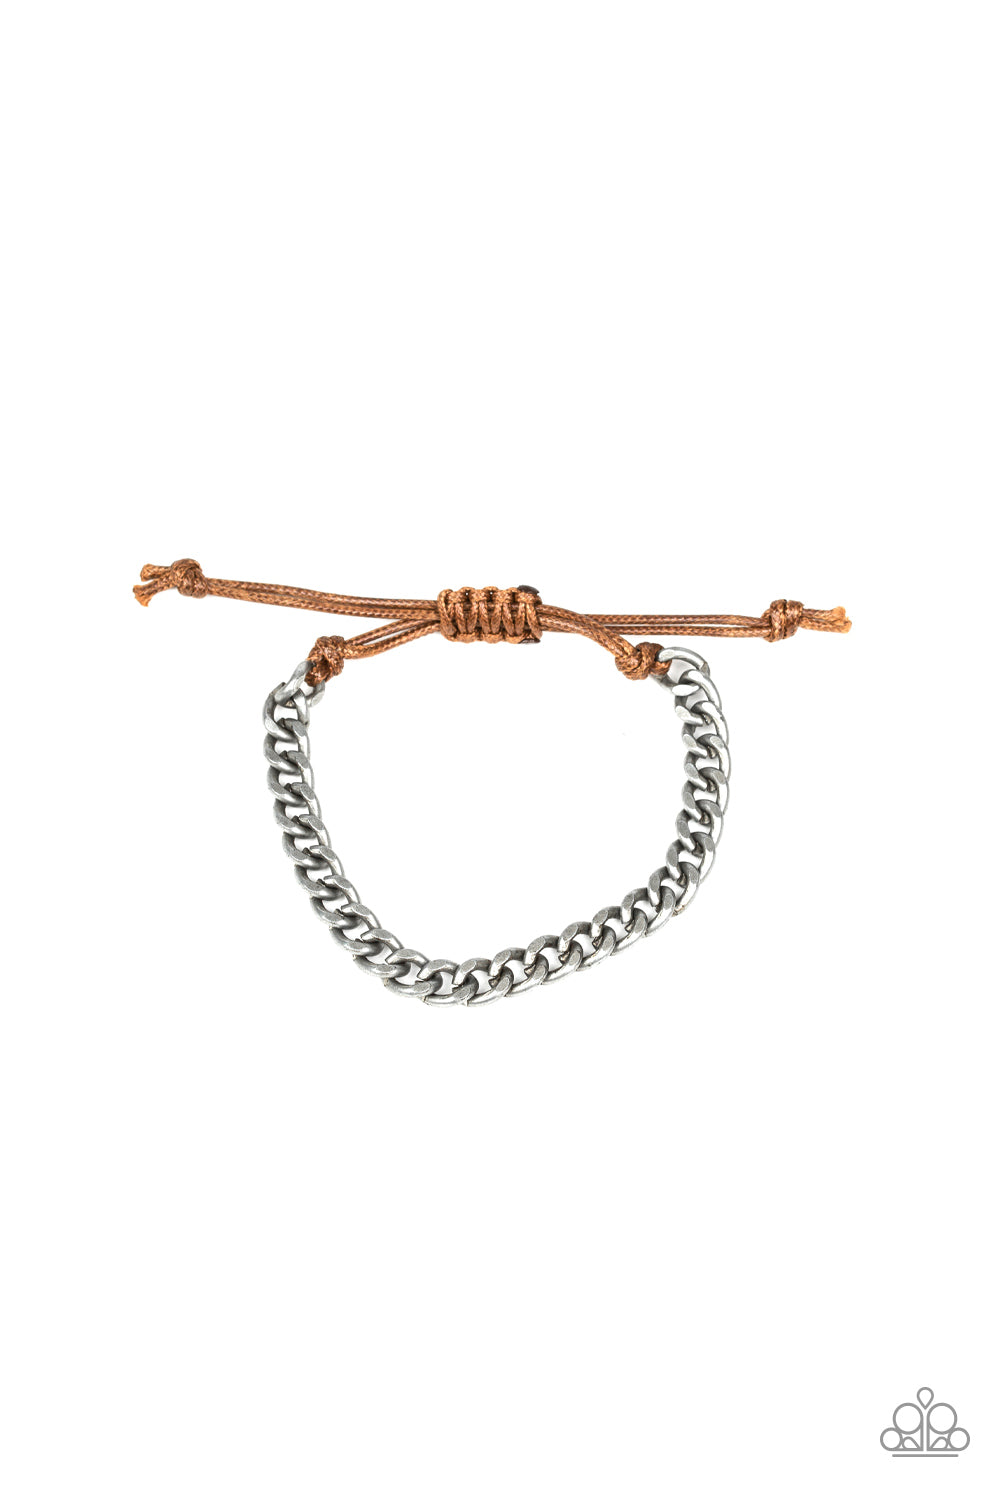 &lt;P&gt;Shiny brown cording knots around the ends of a dainty silver beveled cable chain that is wrapped across the top of the wrist for a versatile look. Features an adjustable sliding knot closure.
&lt;/P&gt;  

&lt;P&gt; &lt;I&gt;Sold as one individual bracelet. &lt;/I&gt;&lt;/P&gt;

&lt;img src=\&quot;https://d9b54x484lq62.cloudfront.net/paparazzi/shopping/images/517_tag150x115_1.png\&quot; alt=\&quot;New Kit\&quot; align=\&quot;middle\&quot; height=\&quot;50\&quot; width=\&quot;50\&quot;/&gt;